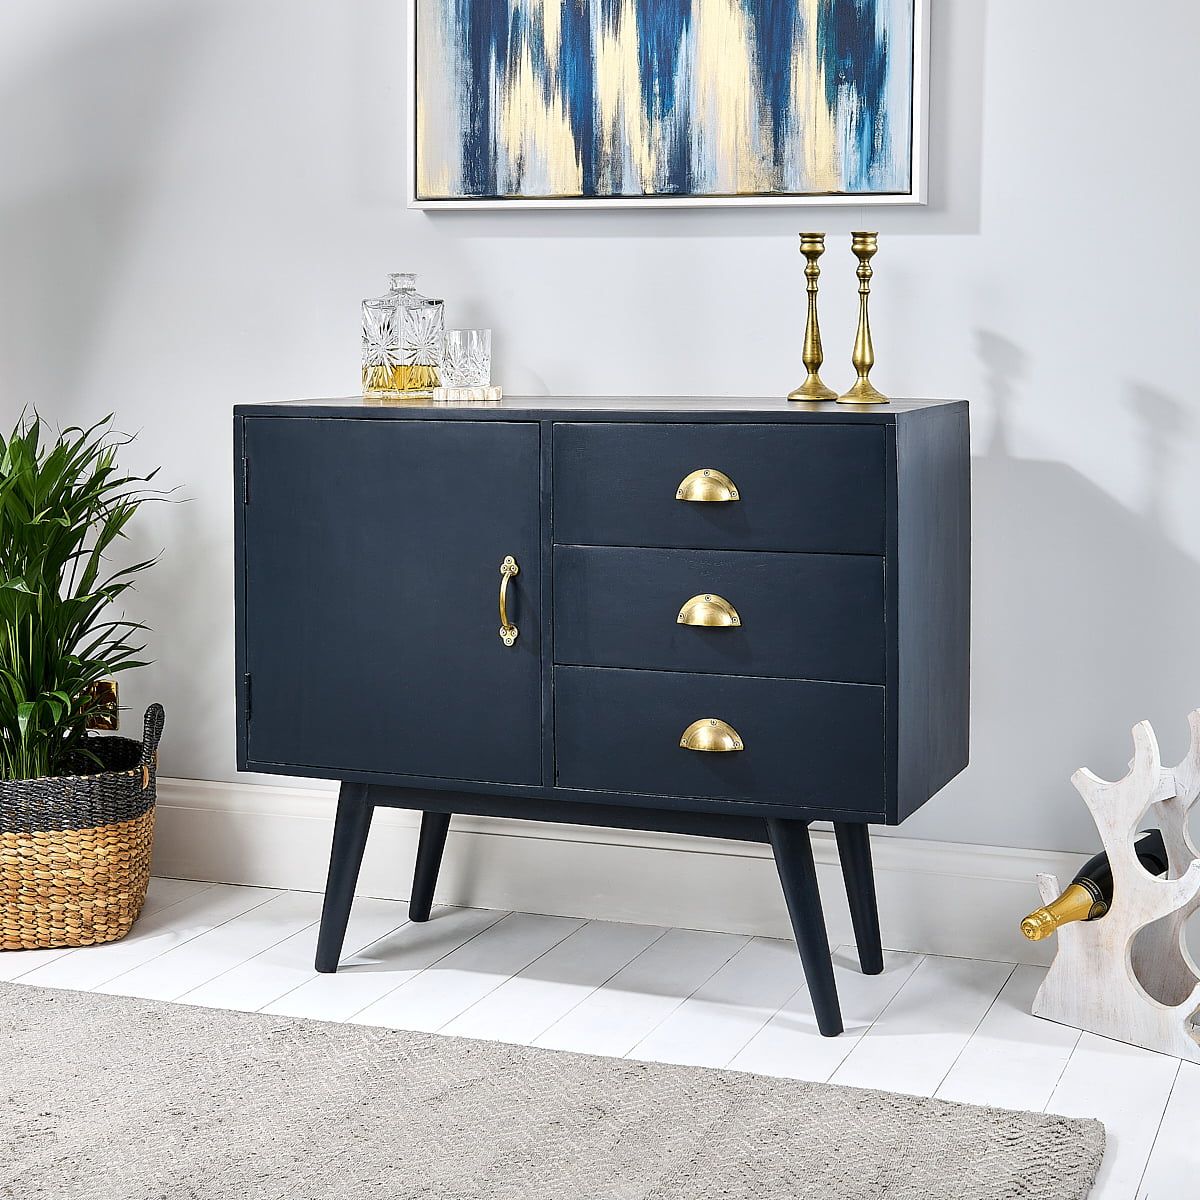 Antique Blue Sideboard Navy – Ellie – Zaza Homes In Navy Blue Sideboards (View 3 of 15)